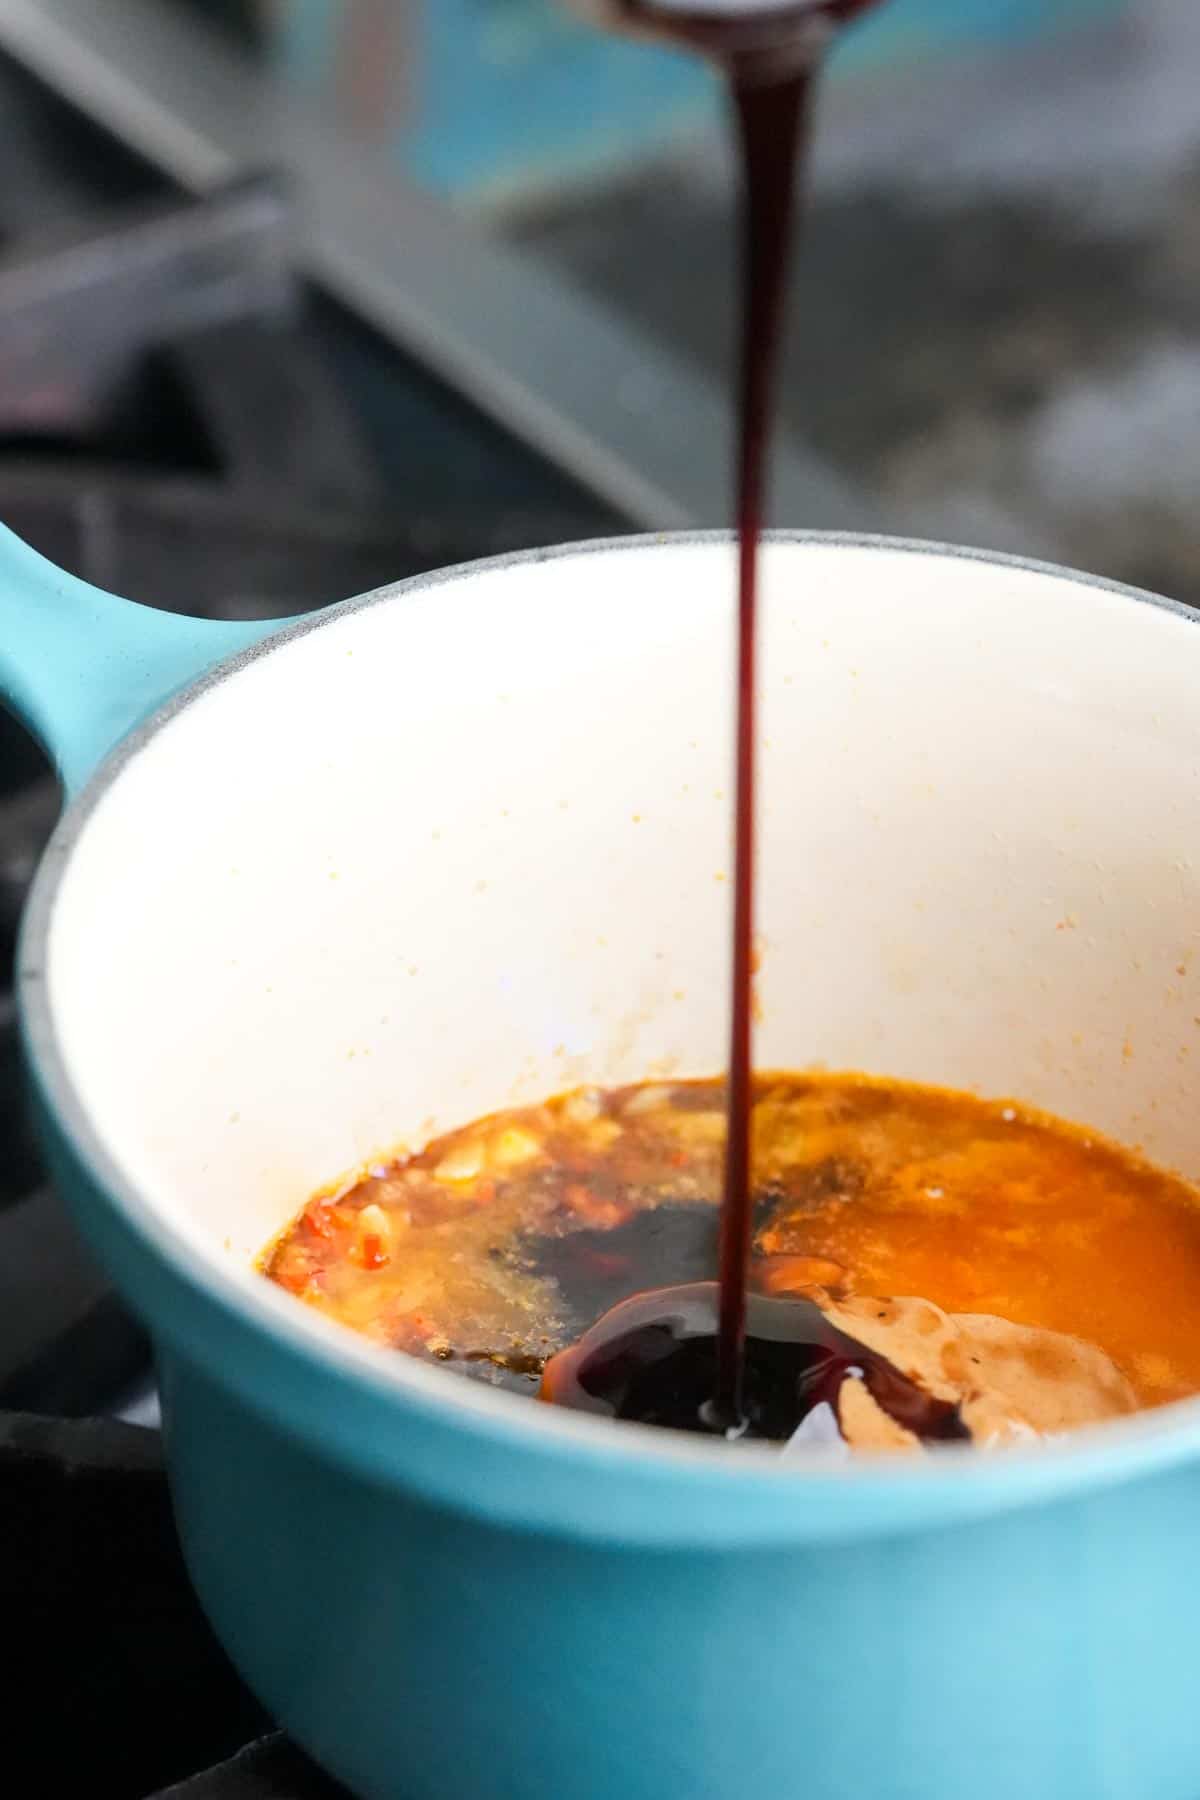 A hoisin sauce is being poured into a blue pot containing peanut butter, sautéed garlic and other ingredients.